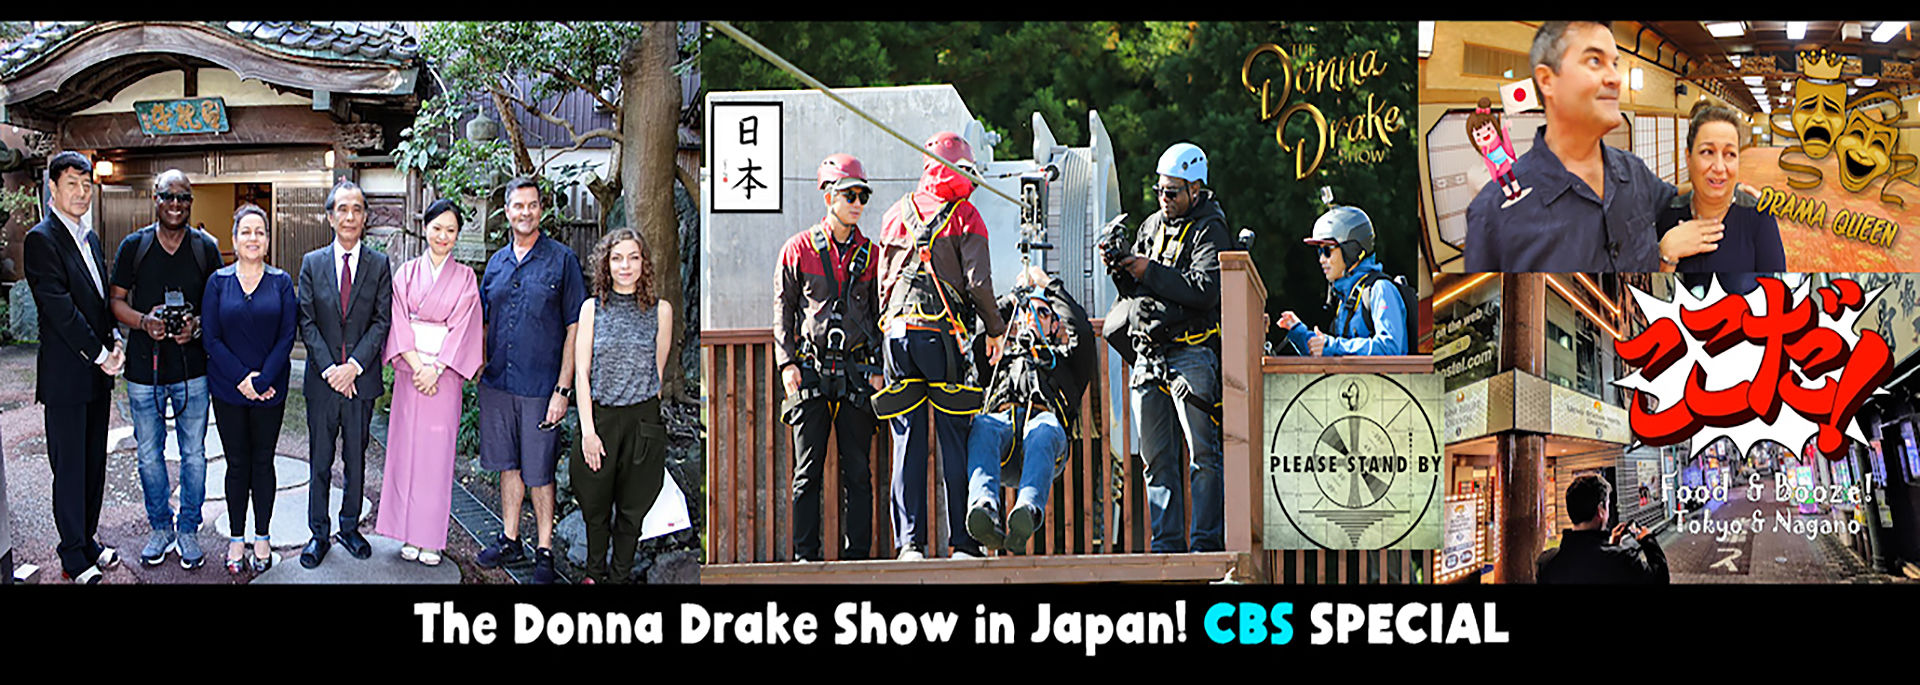 The Donna Drake Show In Japan - CBS Special